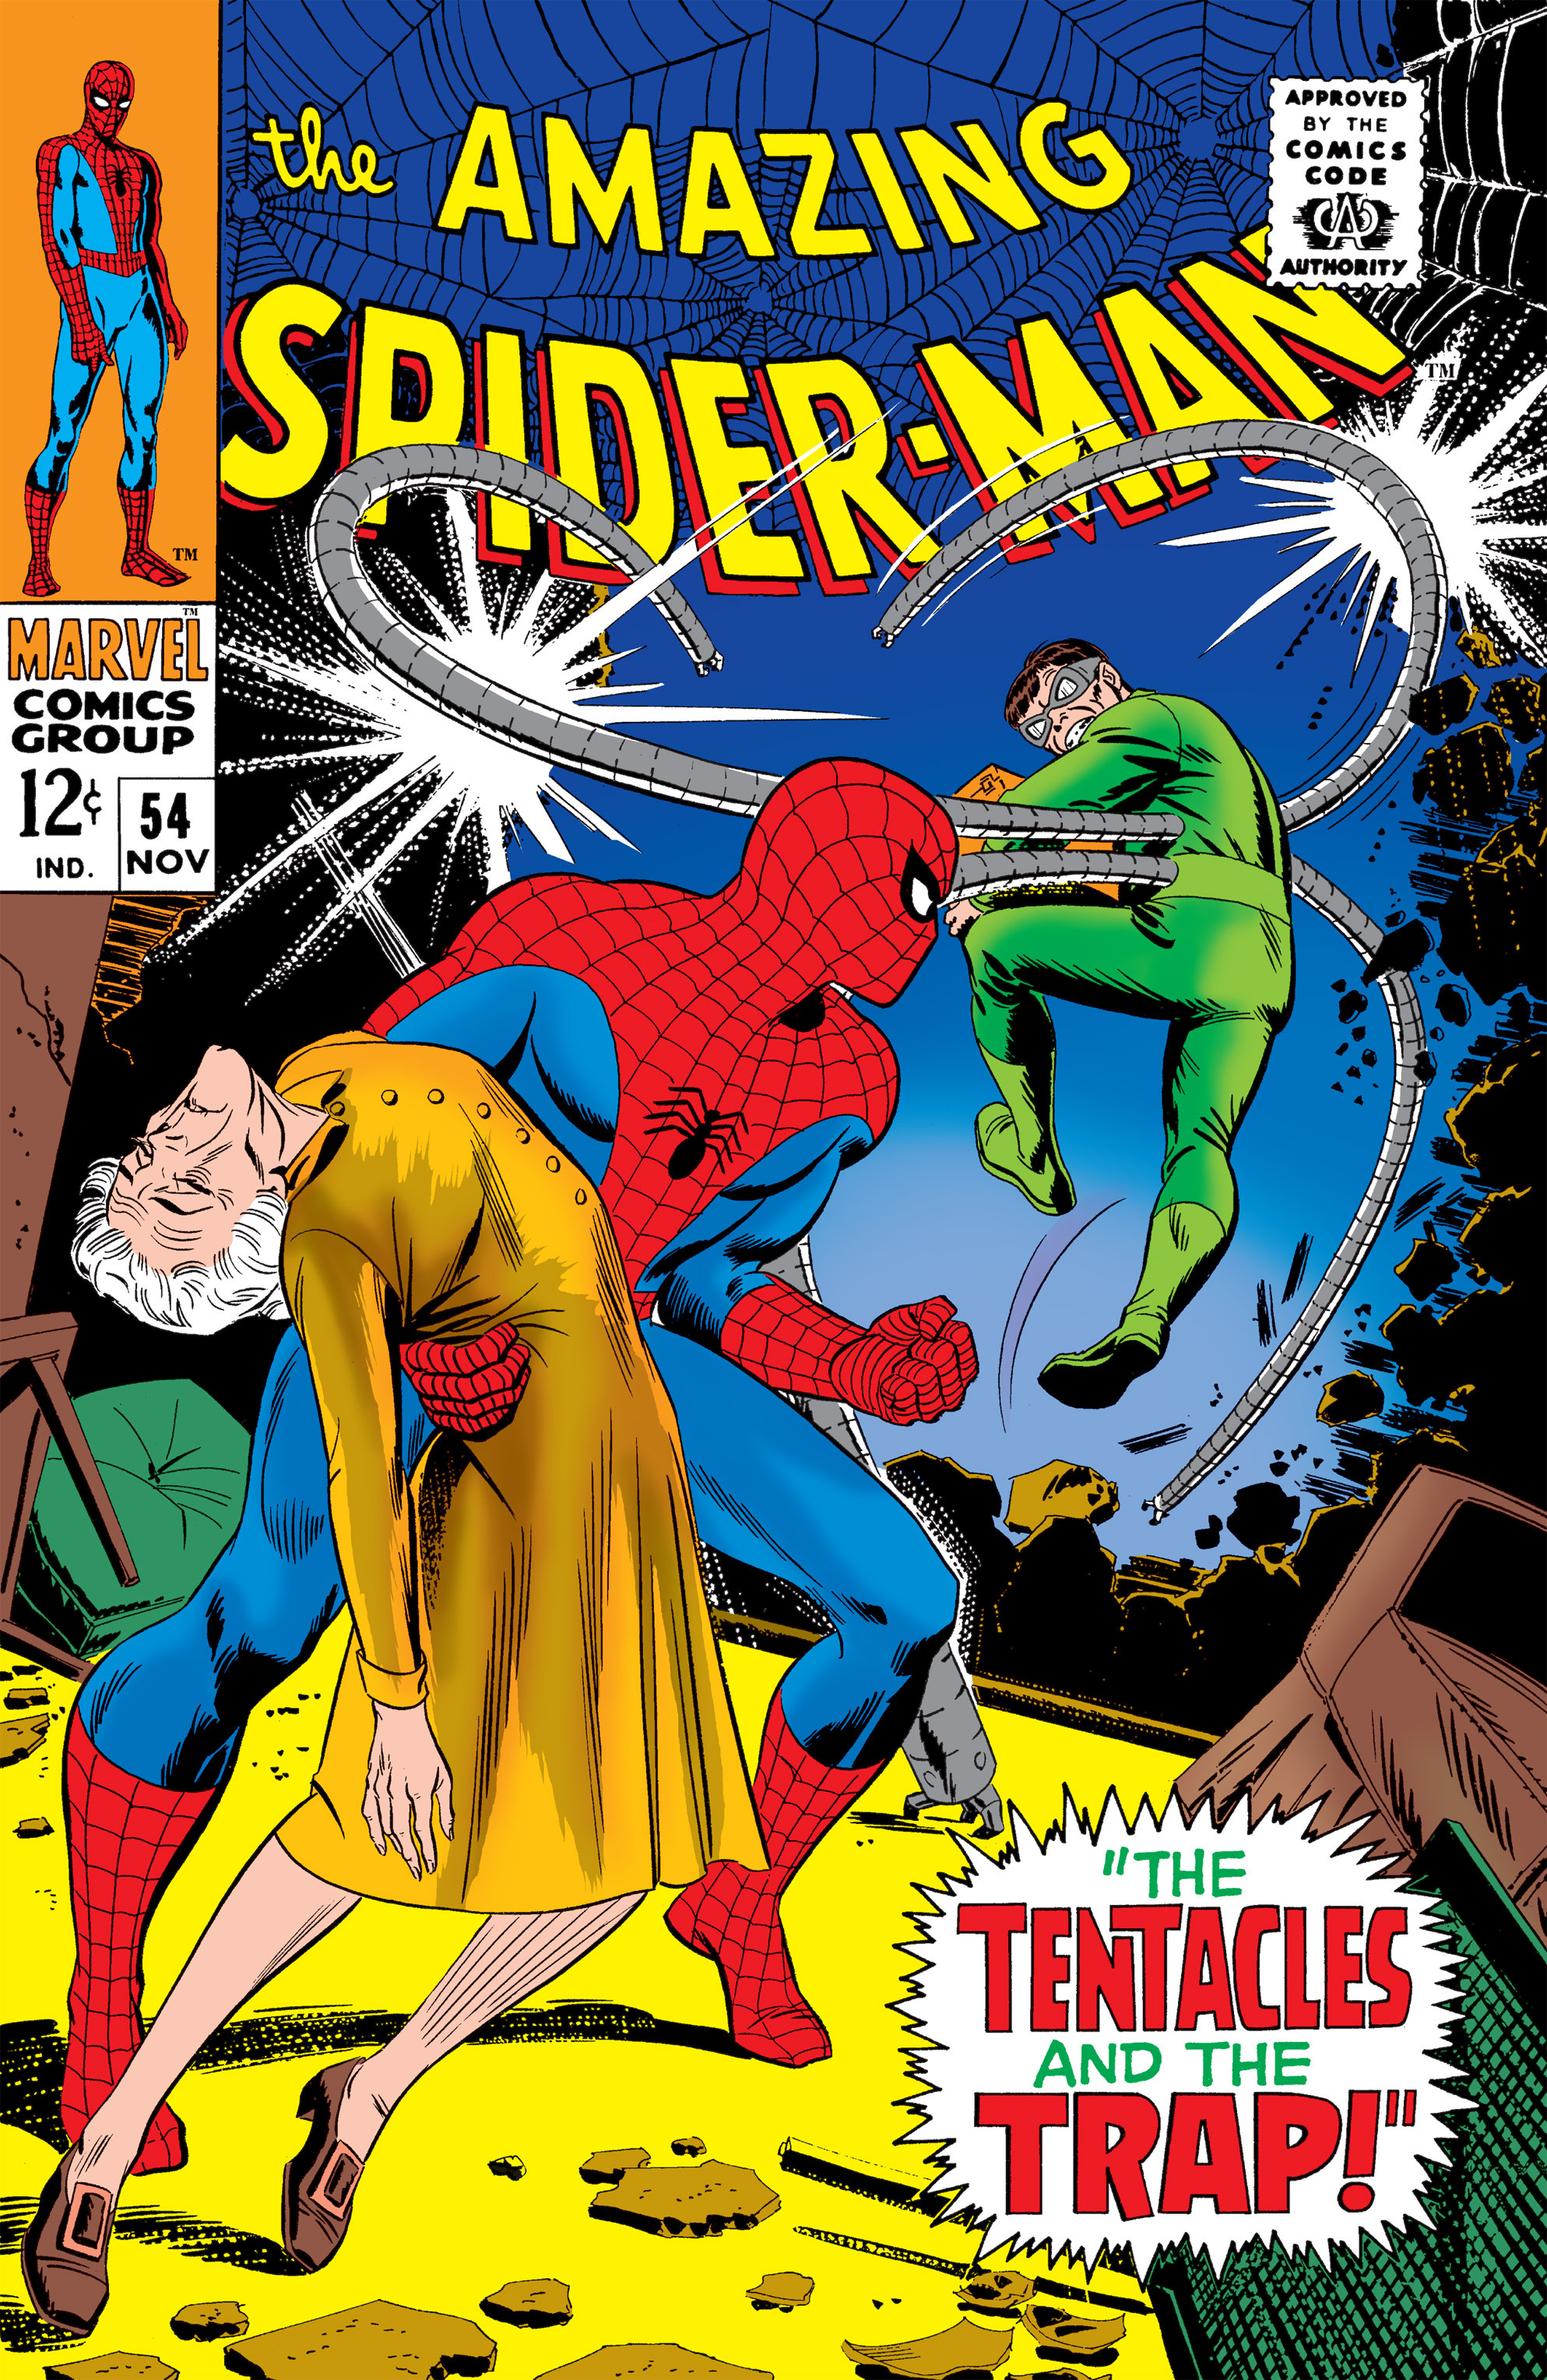 Read online The Amazing Spider-Man (1963) comic -  Issue #54 - 1